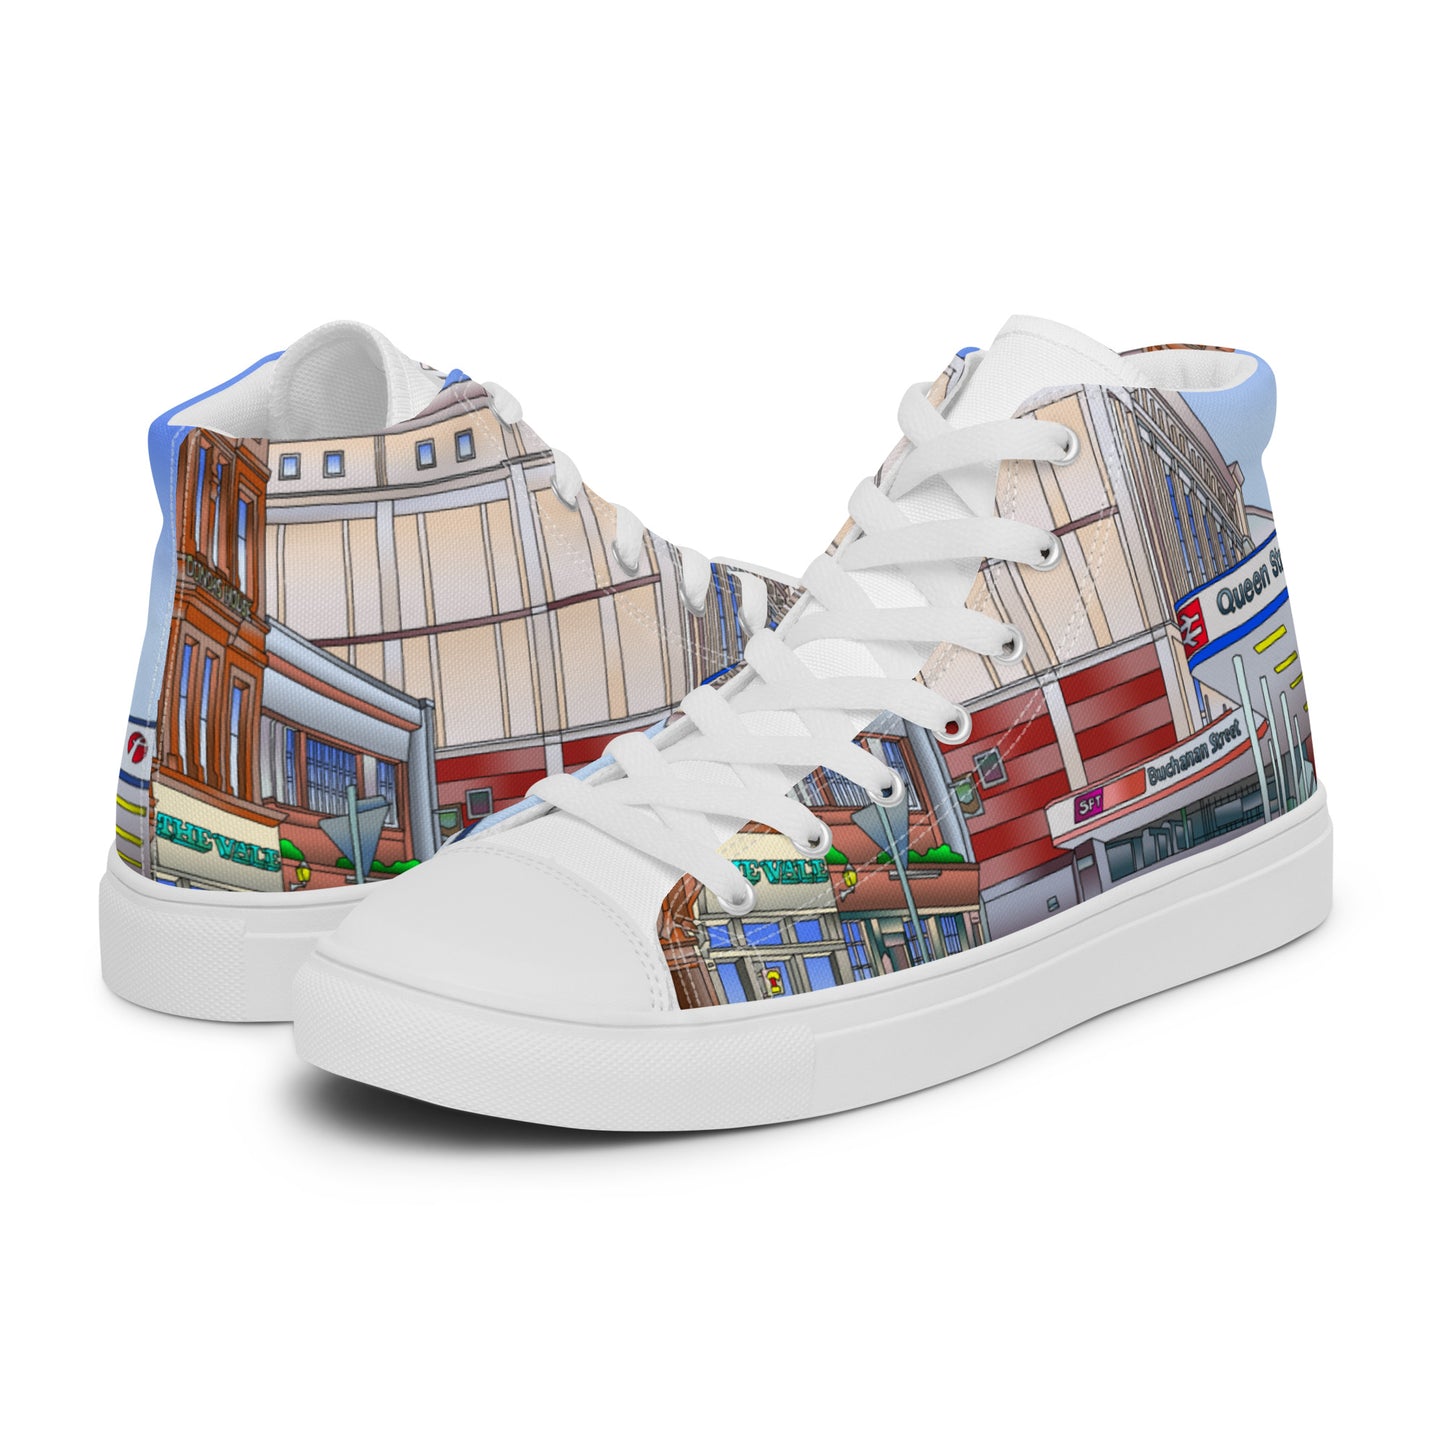 Queen Street Station Glasgow Men’s high top canvas shoes